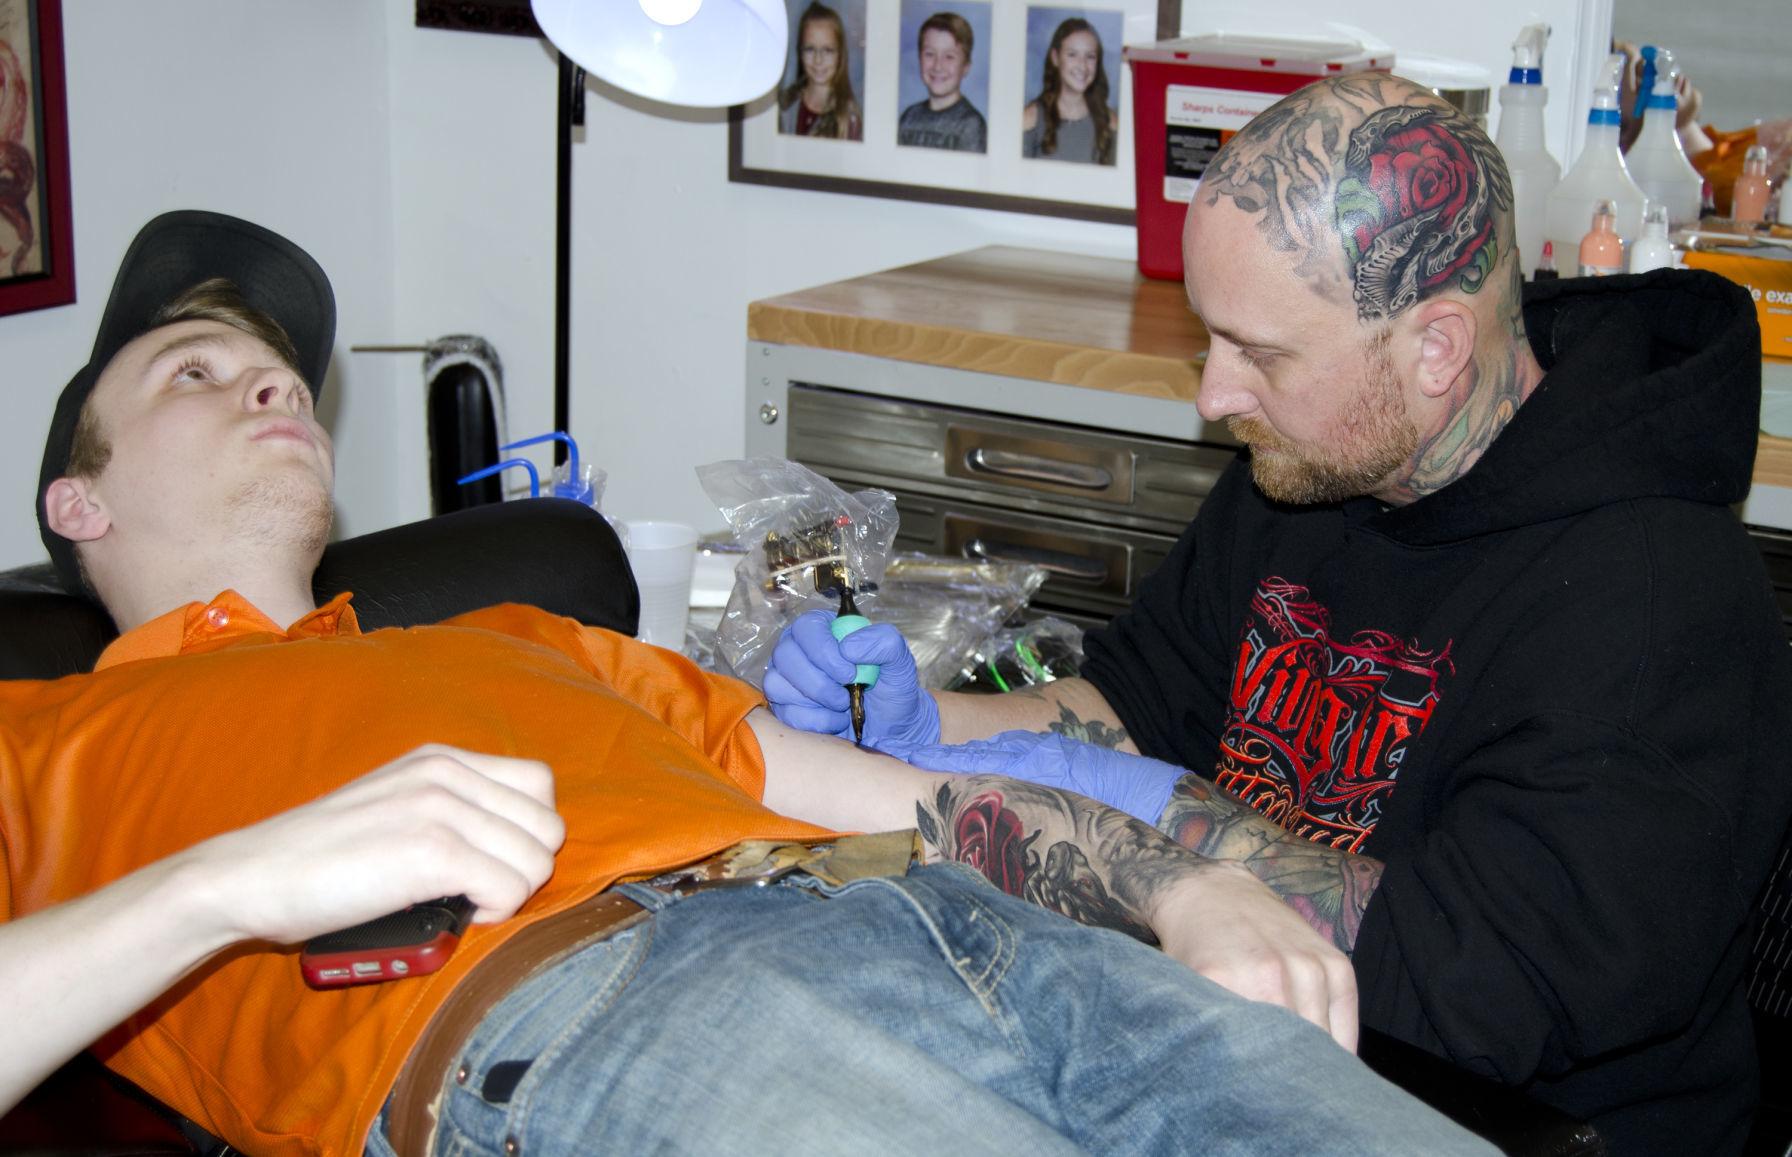 Living Art Tattoos 1 Shannon Street Limerick Reviews and Appointments   GetInked